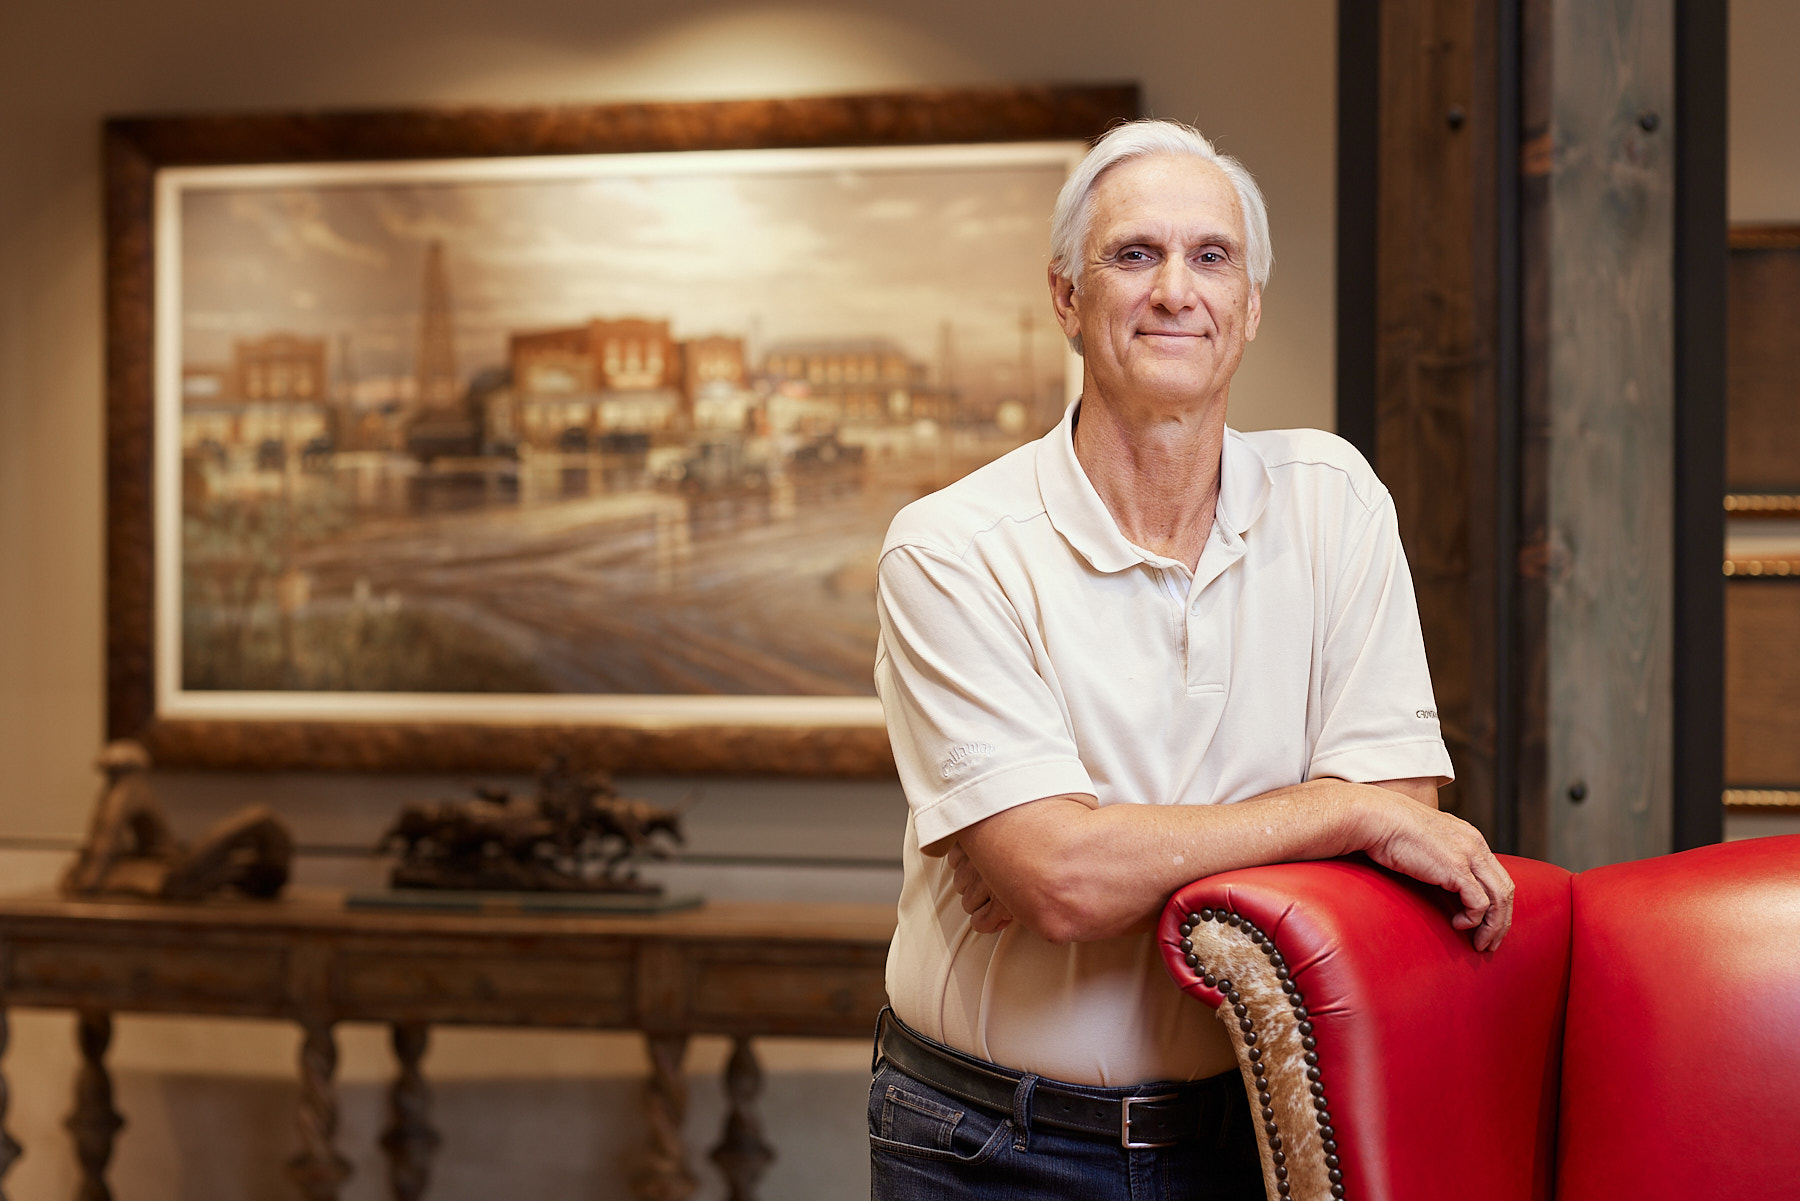 Portrait of Tim Dunn, CrownQuest CEO and Oil Billionaire Midland, Texas